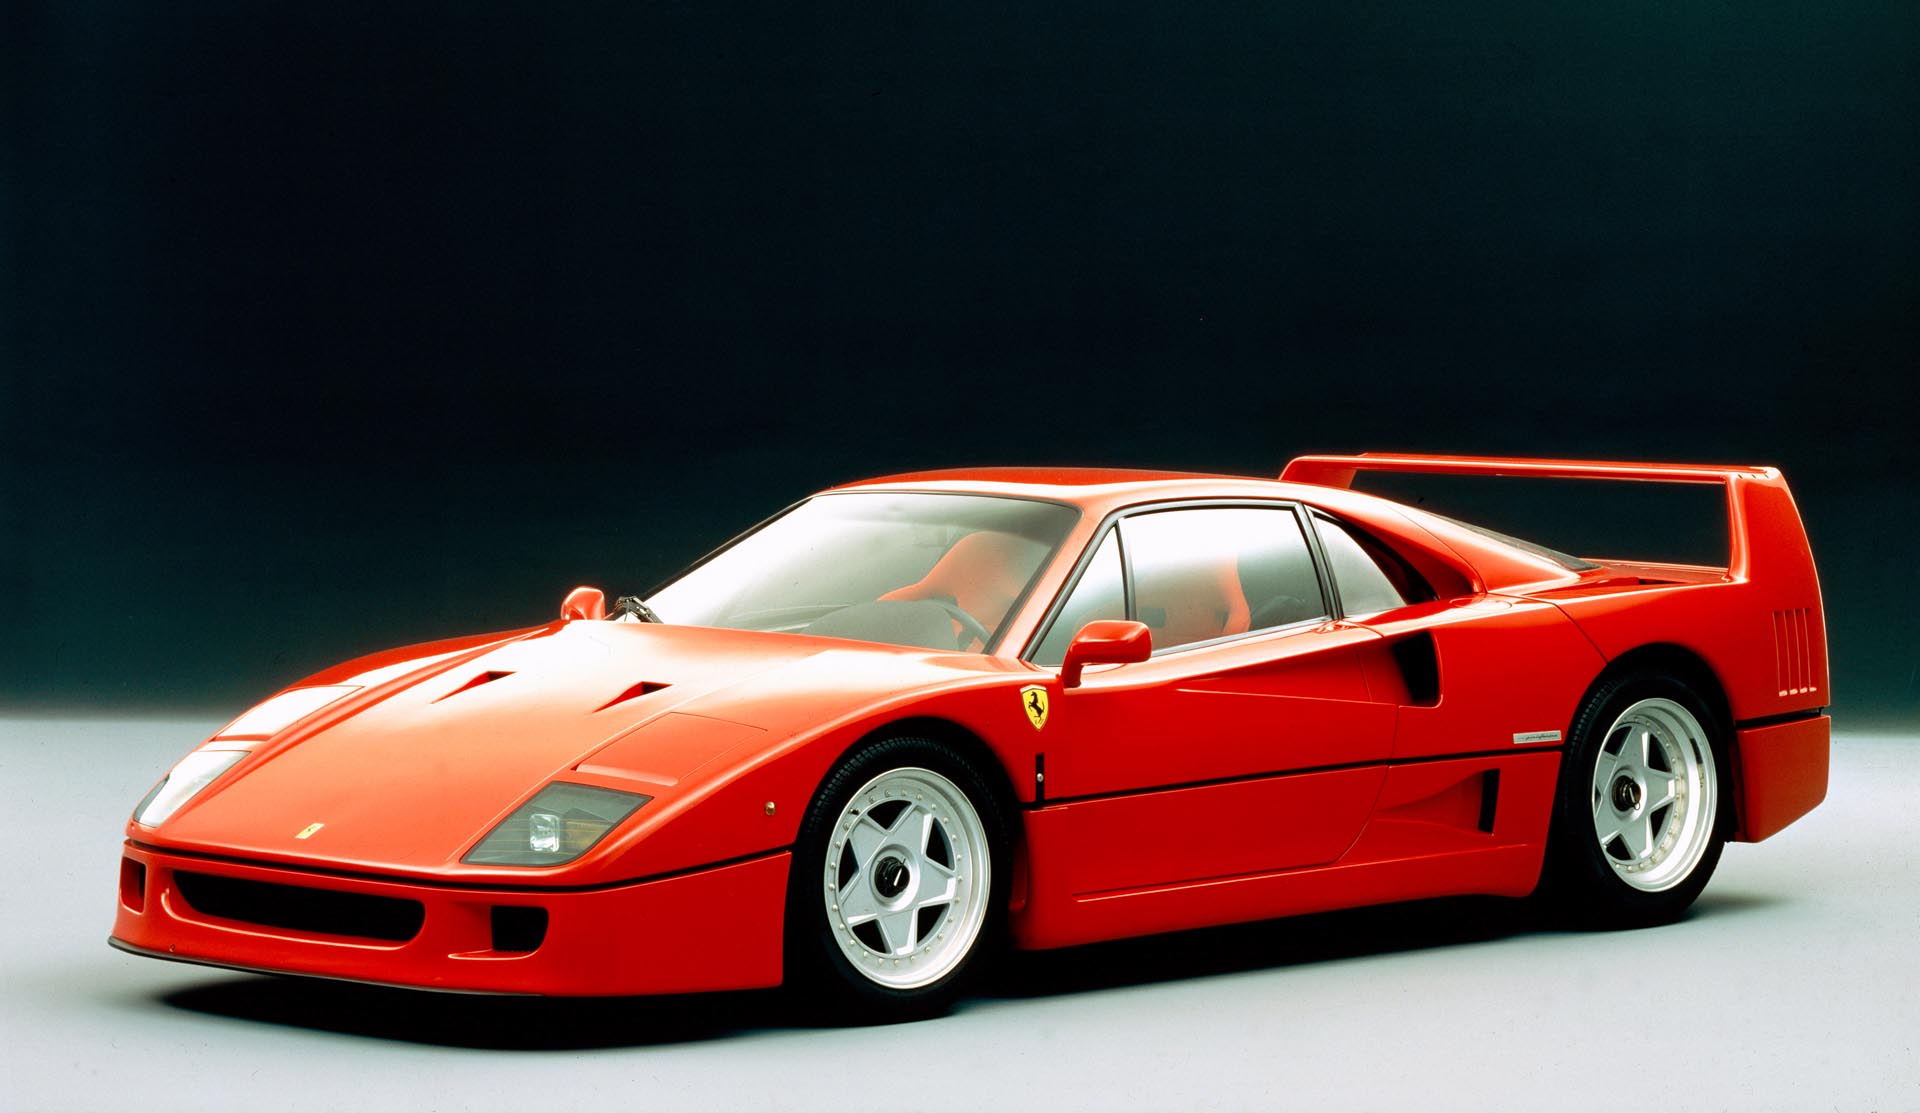 Fitted with the same twin-turbo heart as the 288 GTO, the F40 was essentially a racecar for the road.